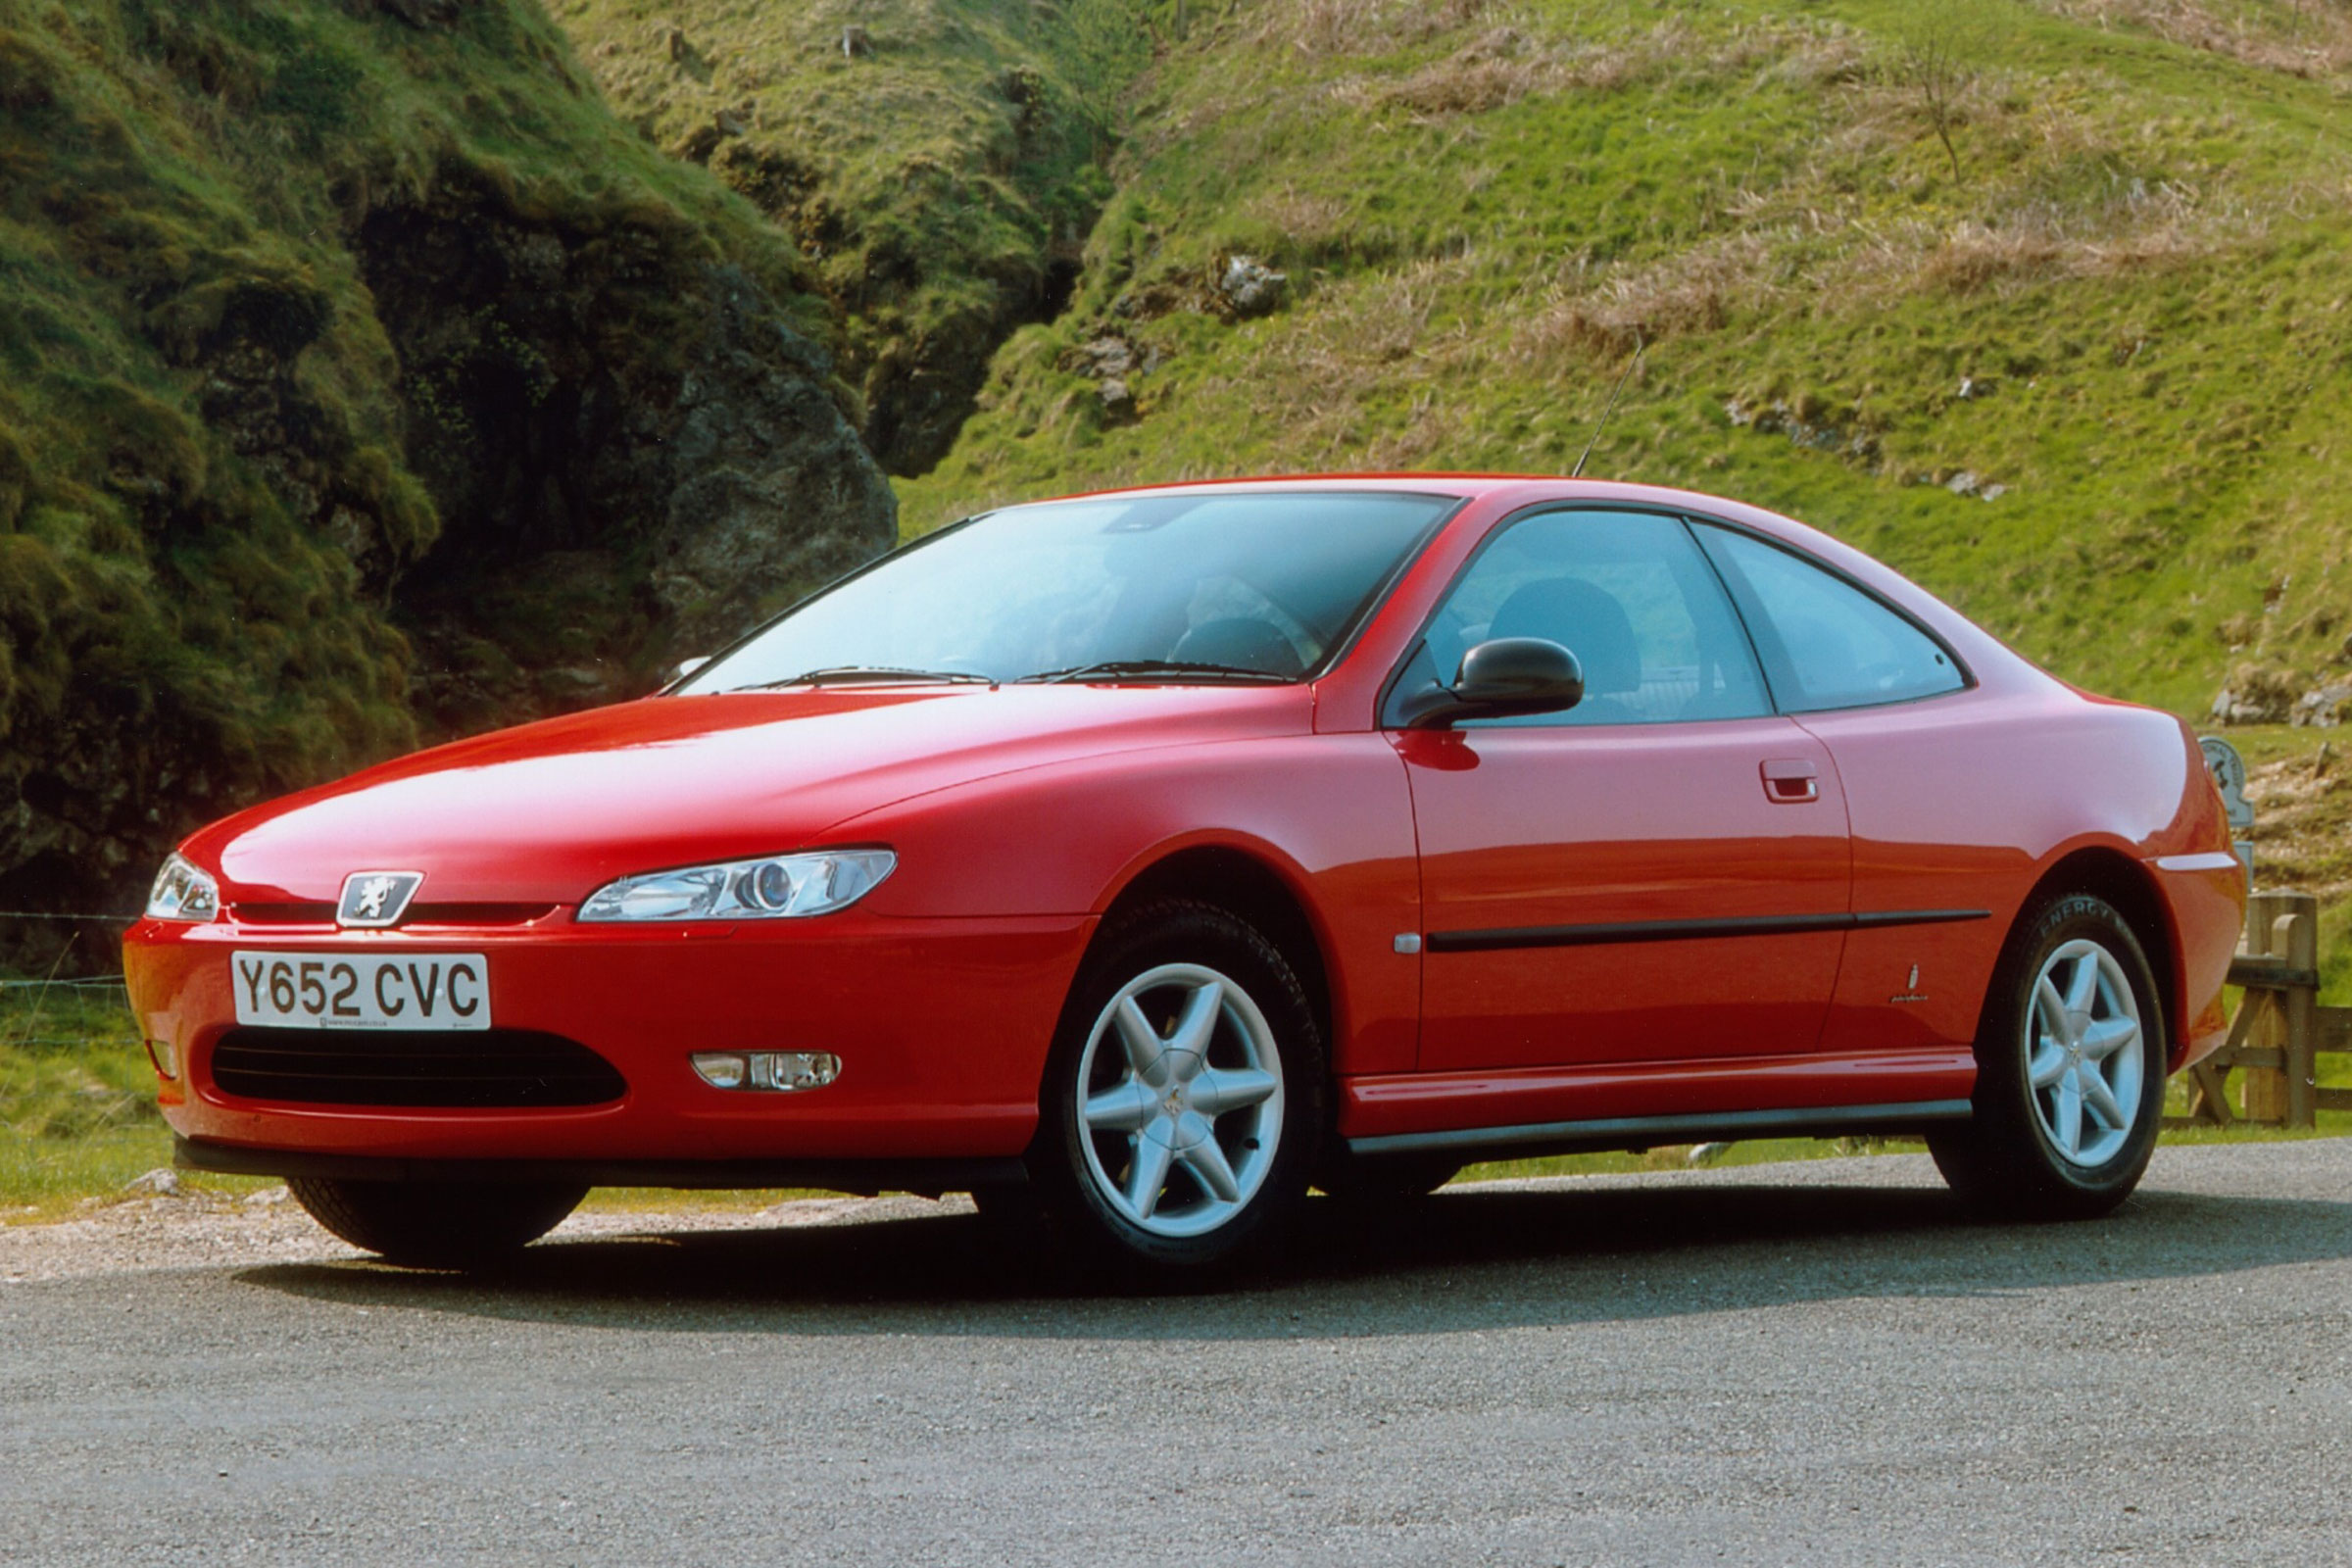 Peugeot 406 Coupe: review, history, prices and specs